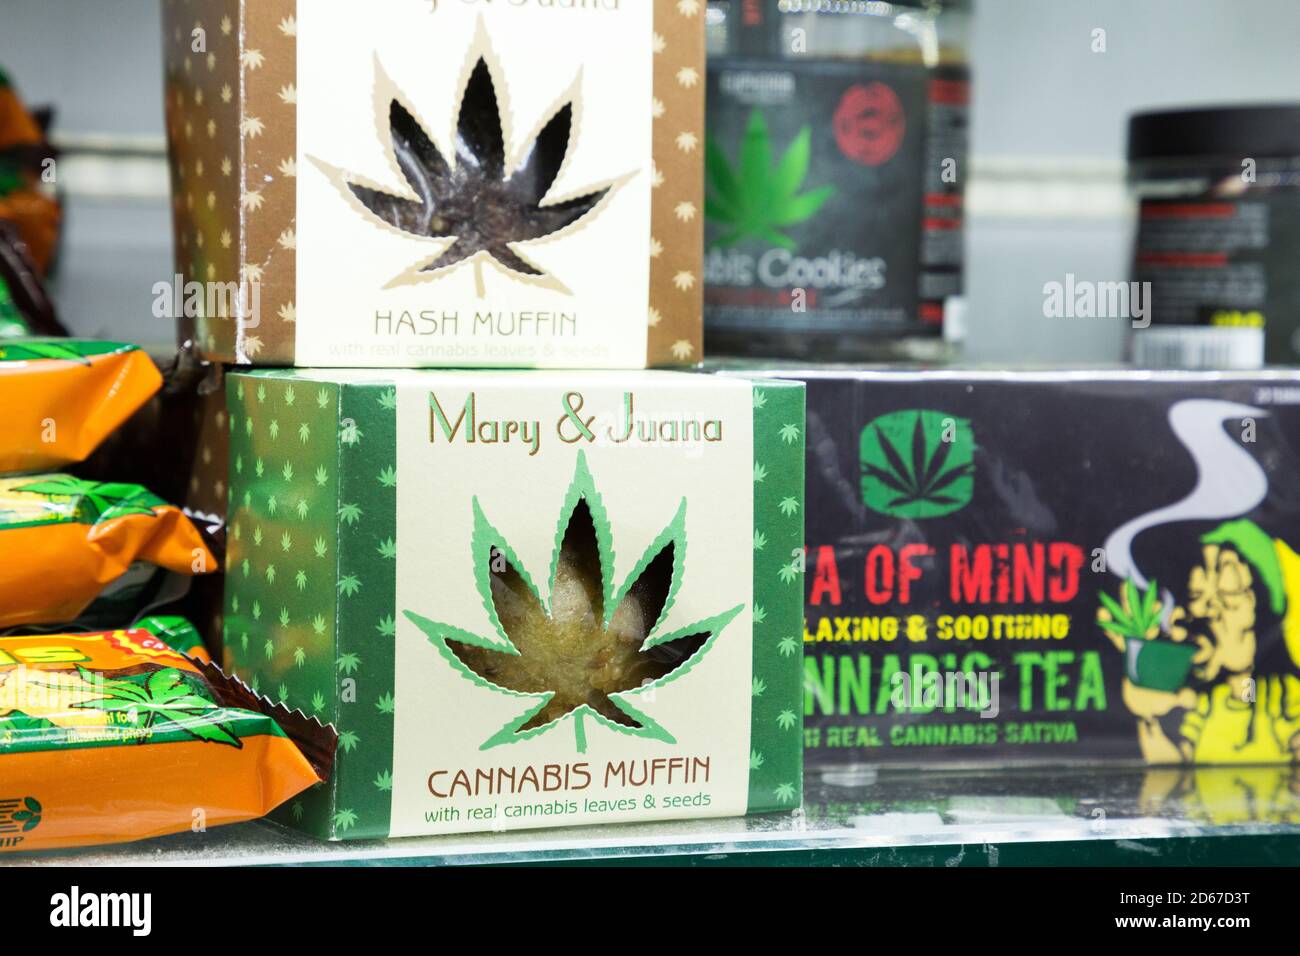 Cannabis products on sale in a store Prague Stock Photo